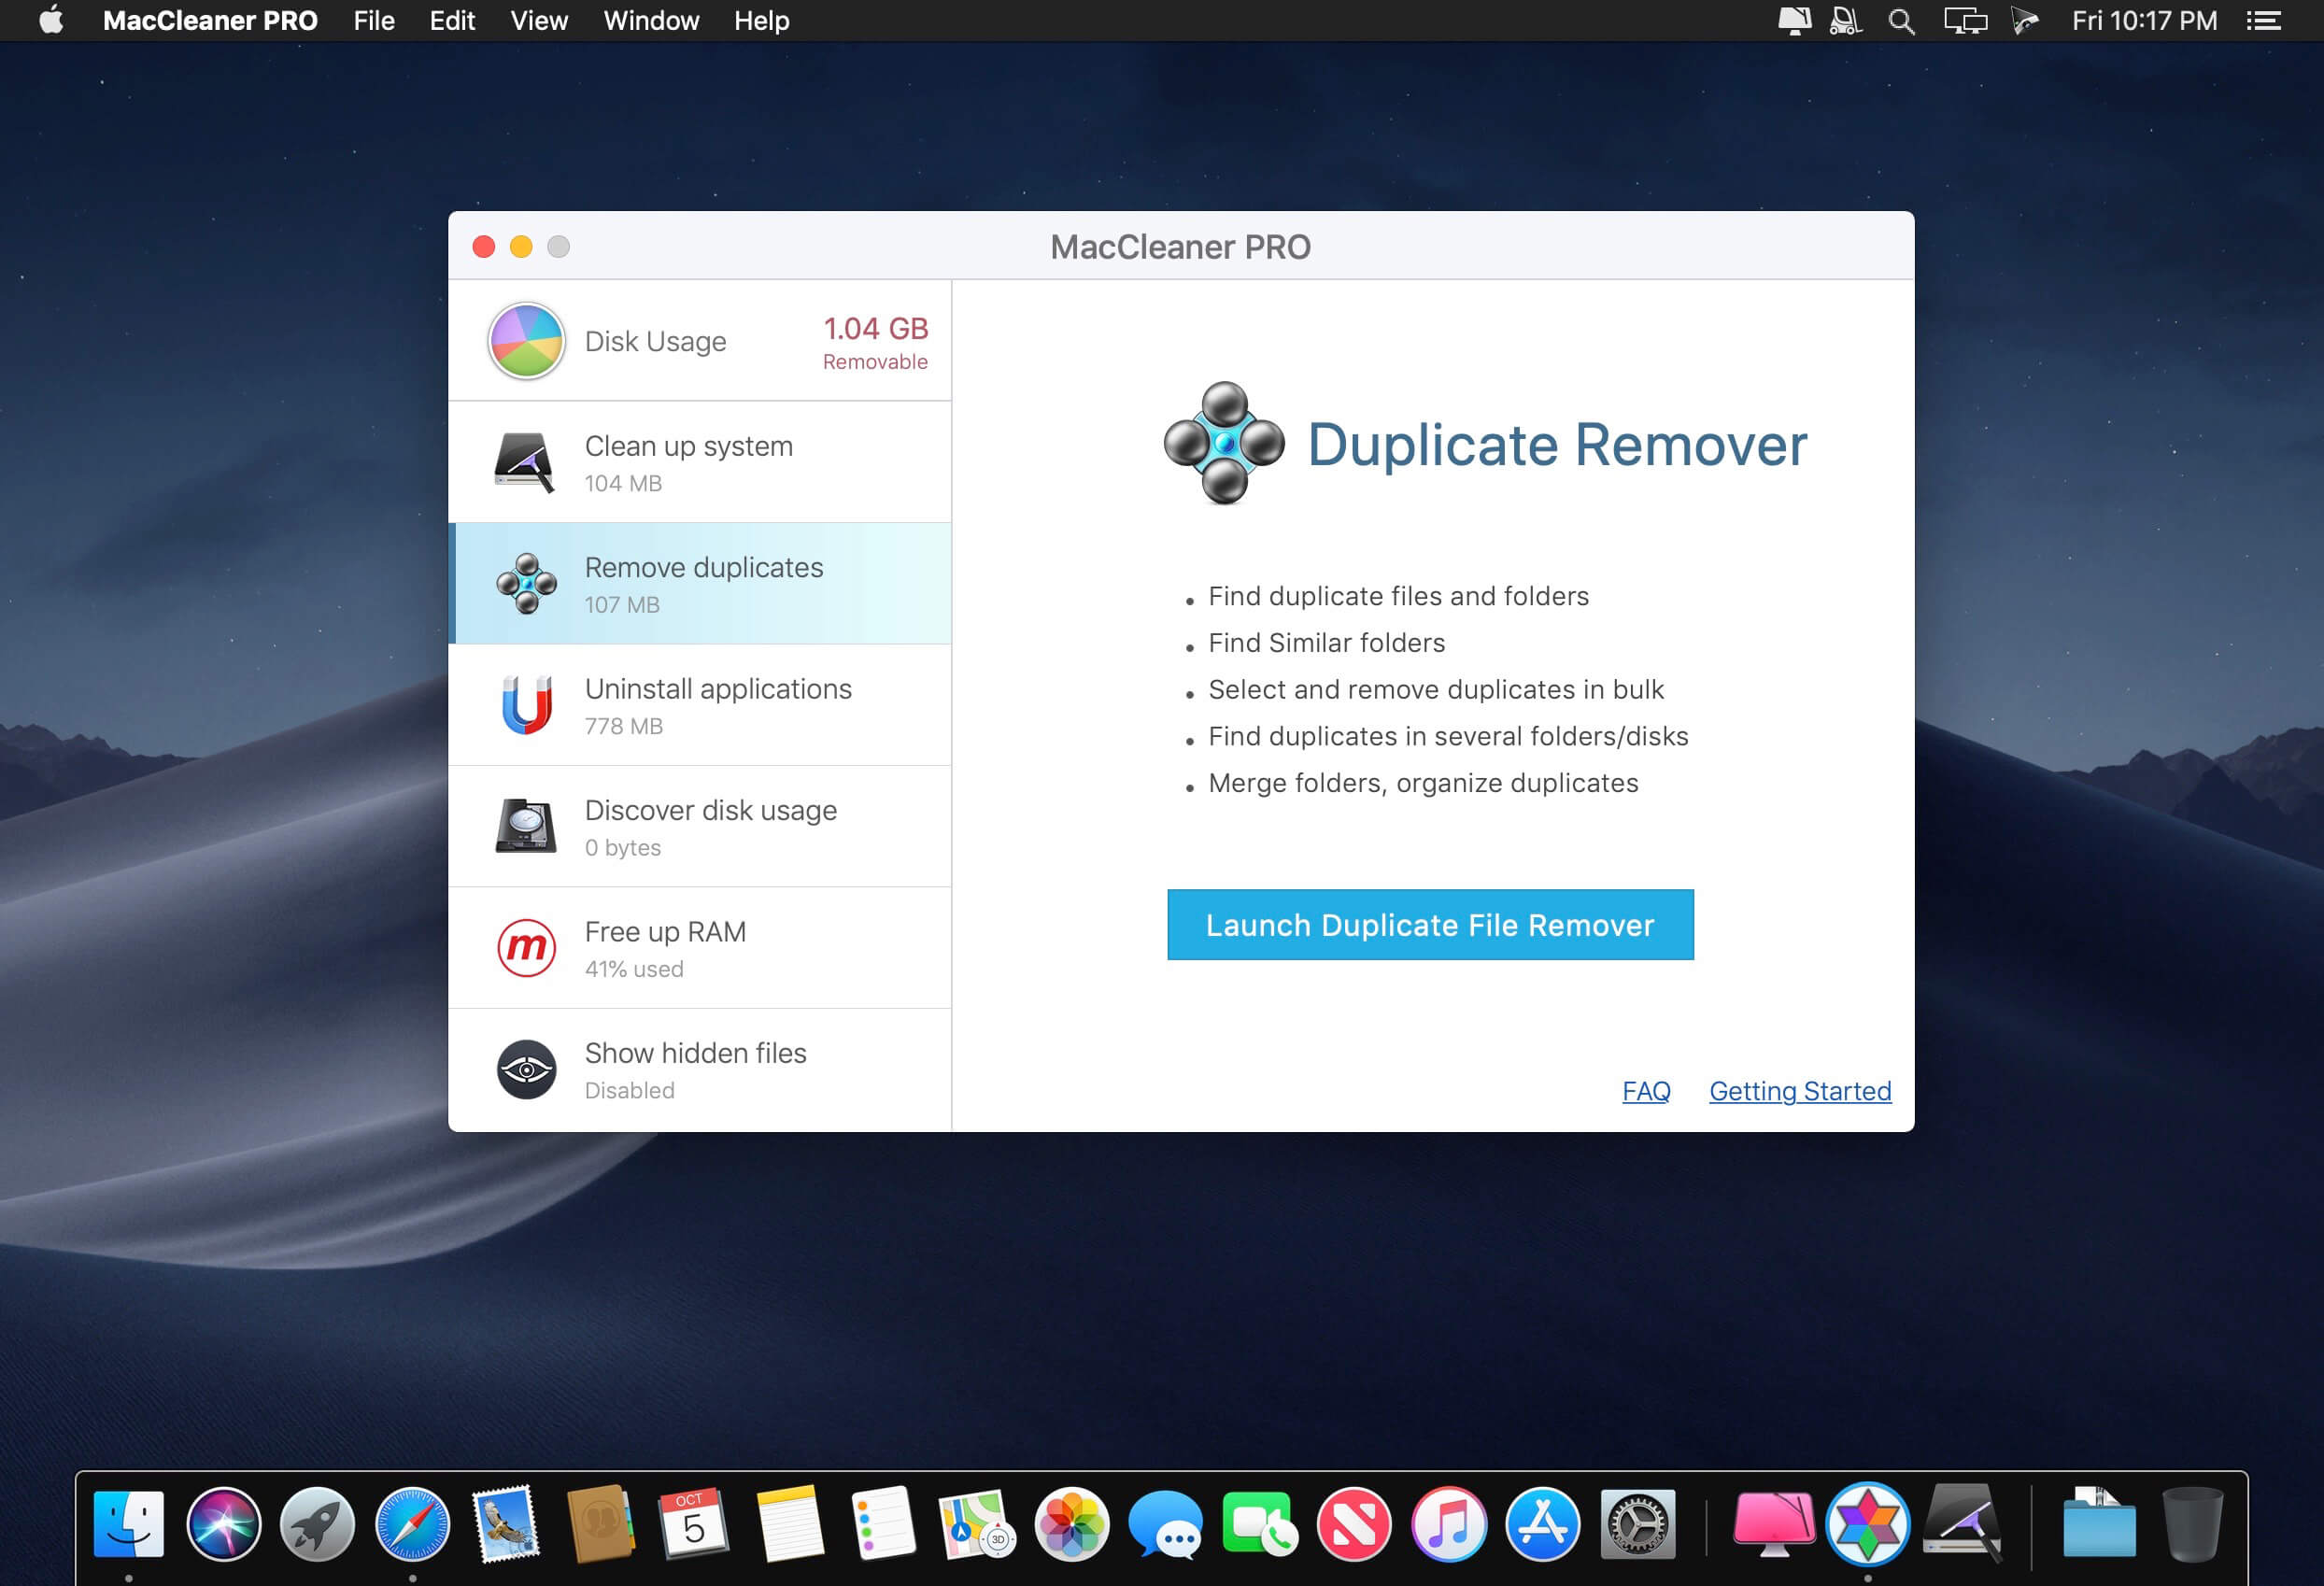 download the last version for ios MacCleaner 3 PRO